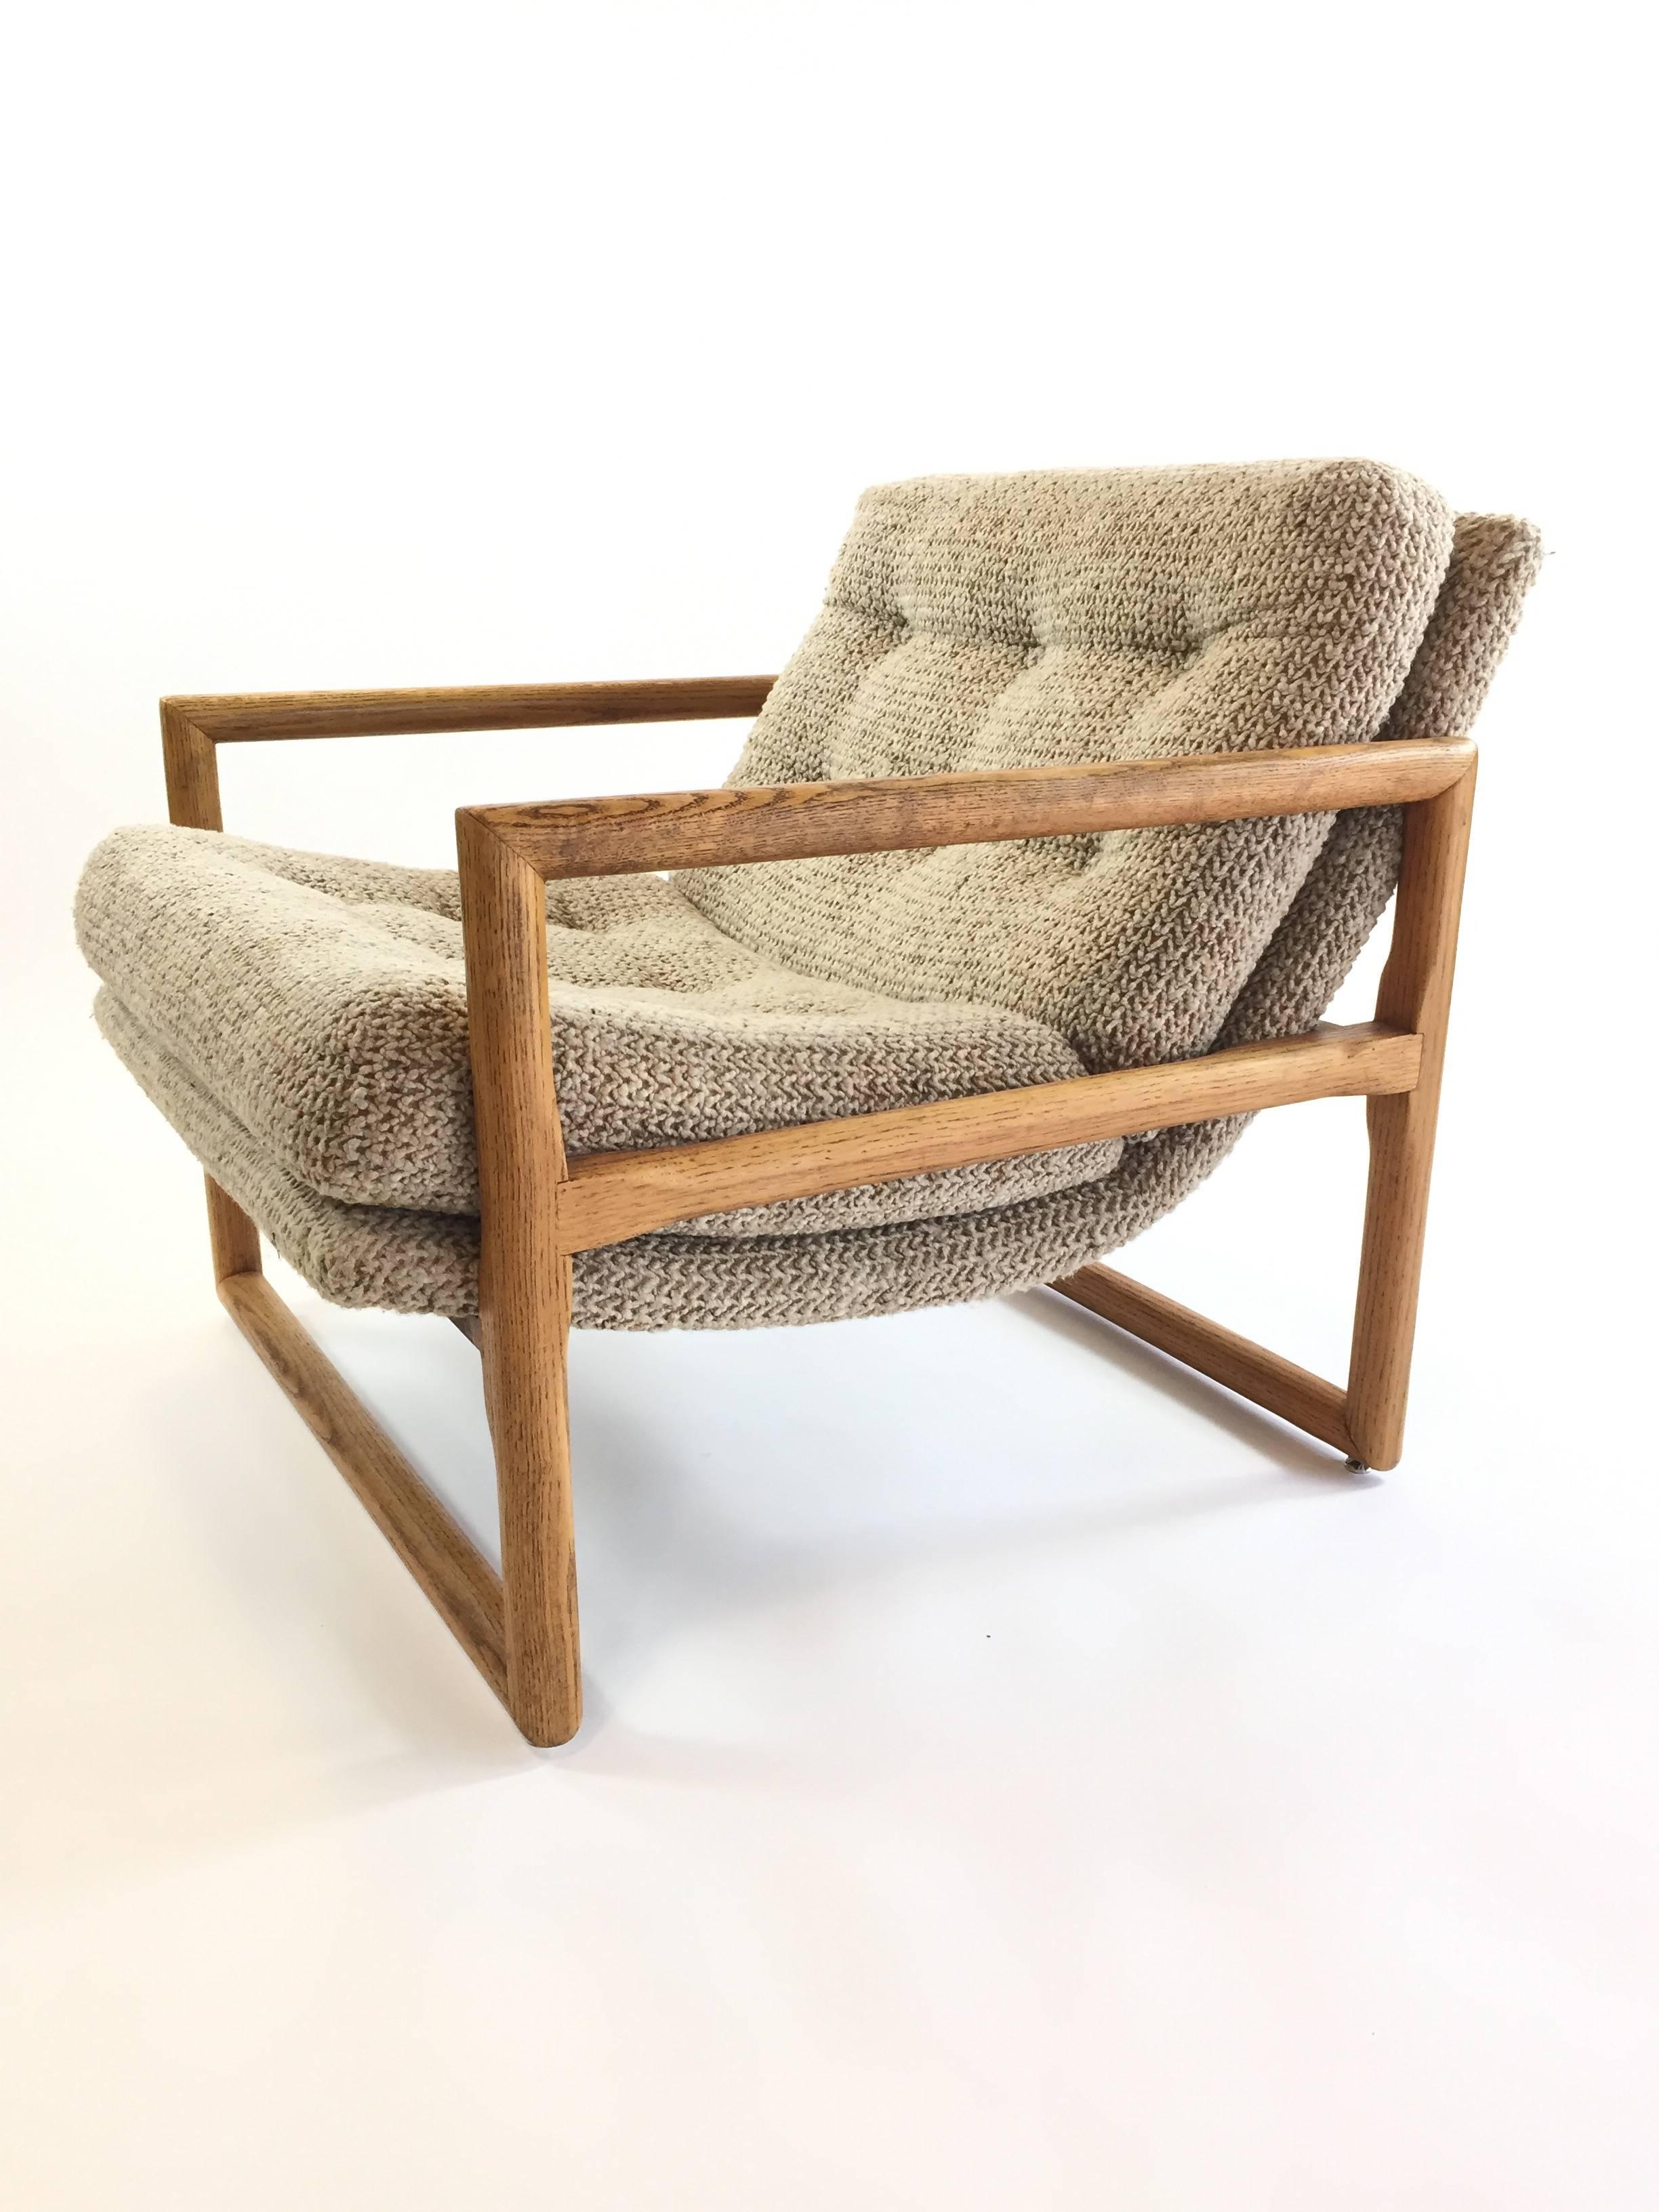 Milo Baughman Cube chairs for Thayer Coggin, circa 1970. Original woven upholstery. A few marks and spots on the fabric - easily cleaned and/or reupholstered.